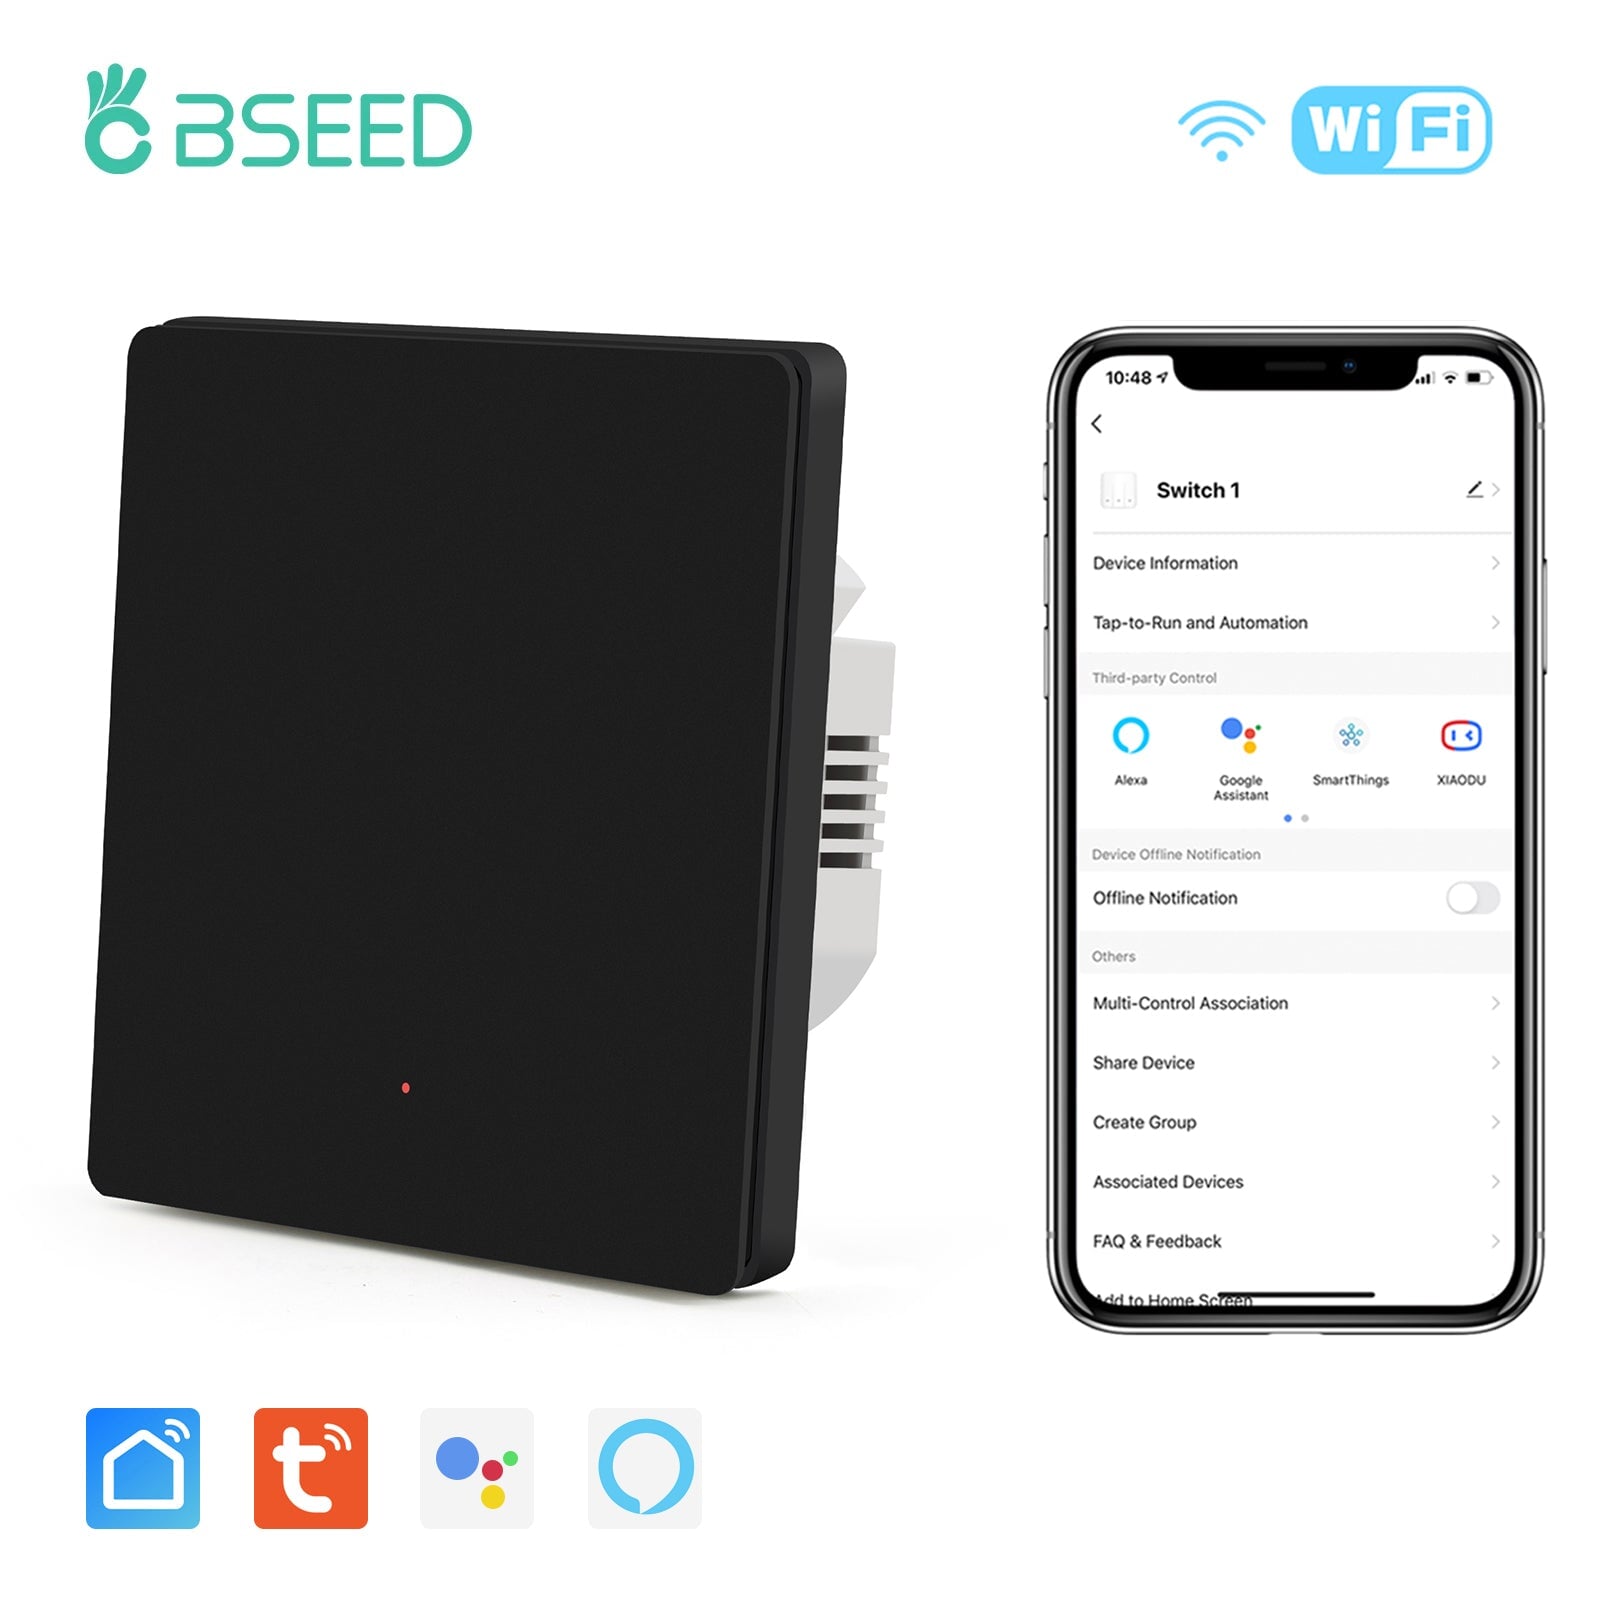 BSEED WiFi Automatic Rebound Smart Wall Light Switches Neutral Switch Bseedswitch Black 1gang 